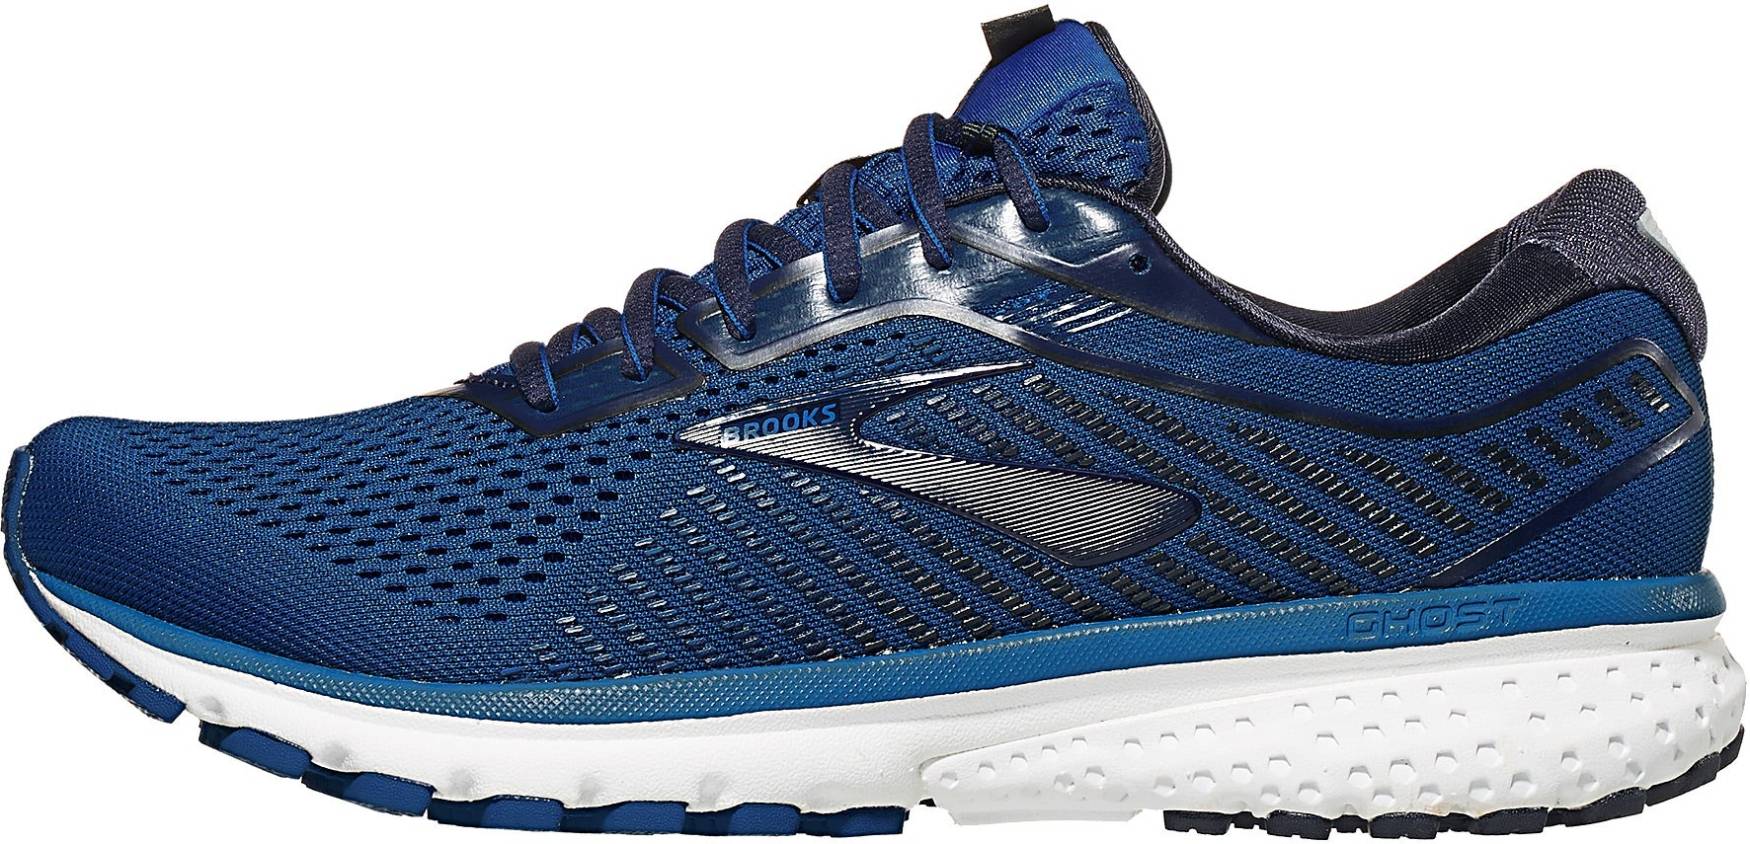 40+ Blue Brooks running shoes: Save up 